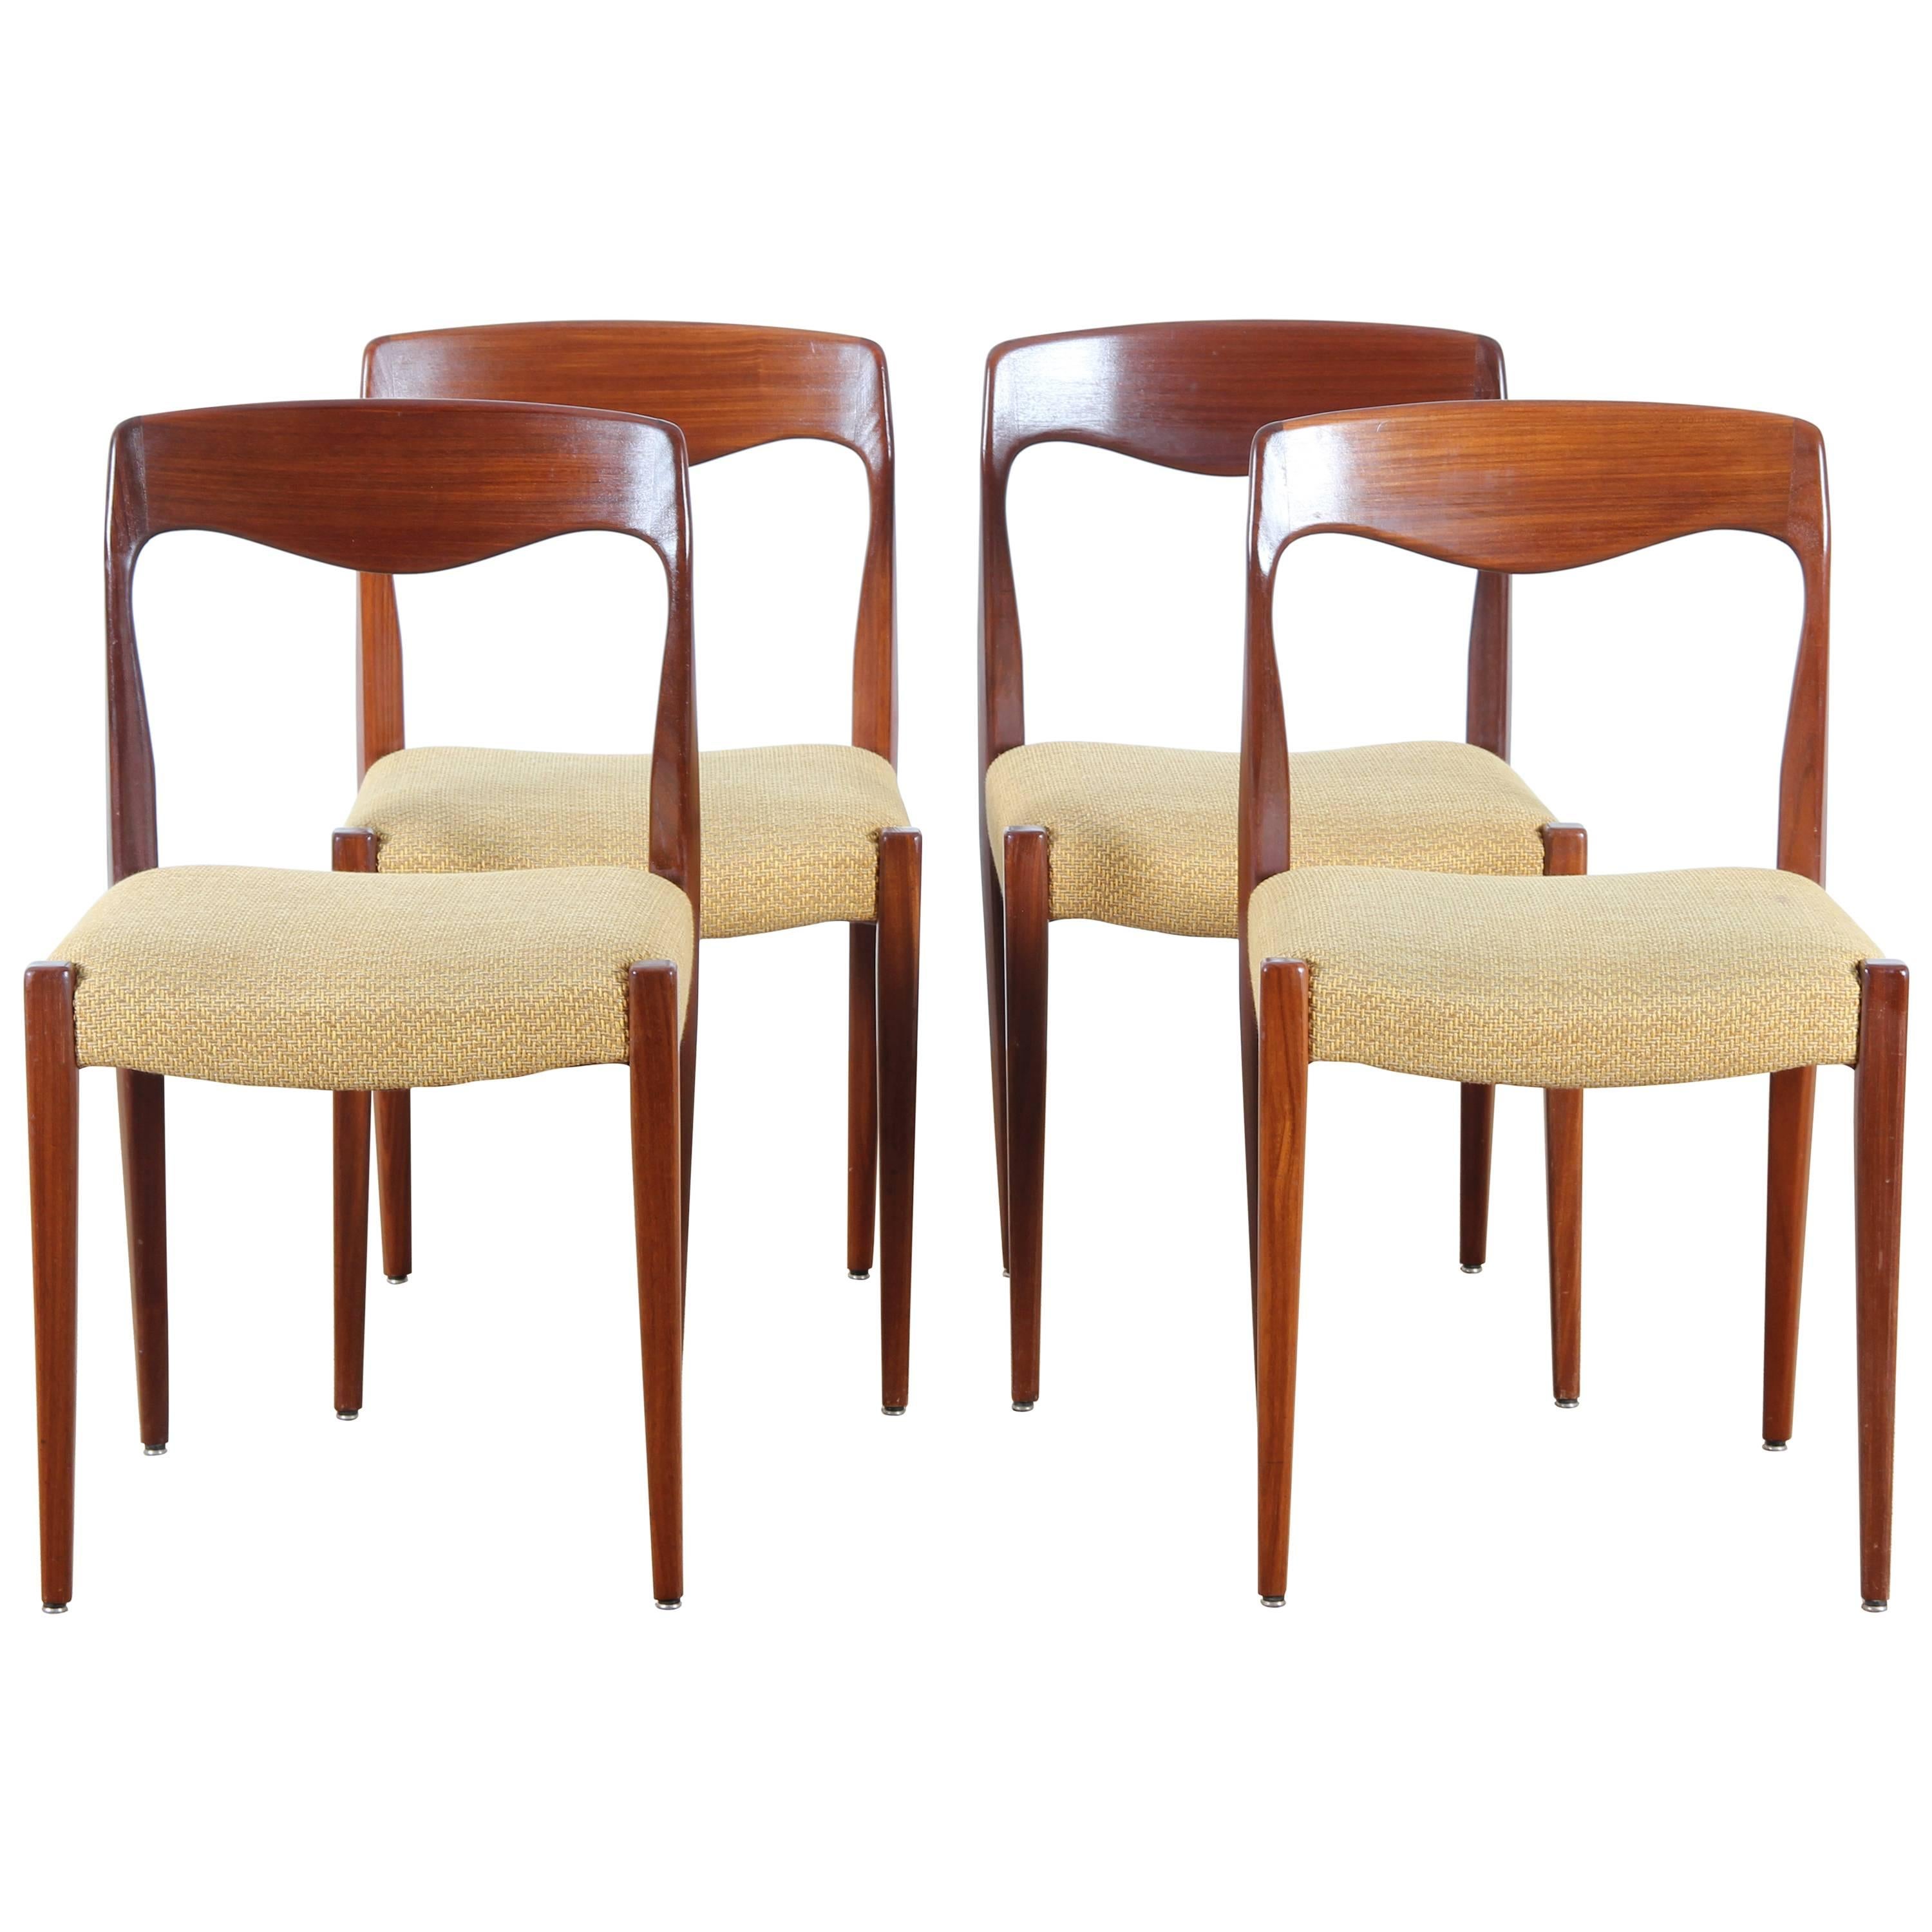 Set of Four Scandinavian Chairs in Teak with Pierre Frey Fabric